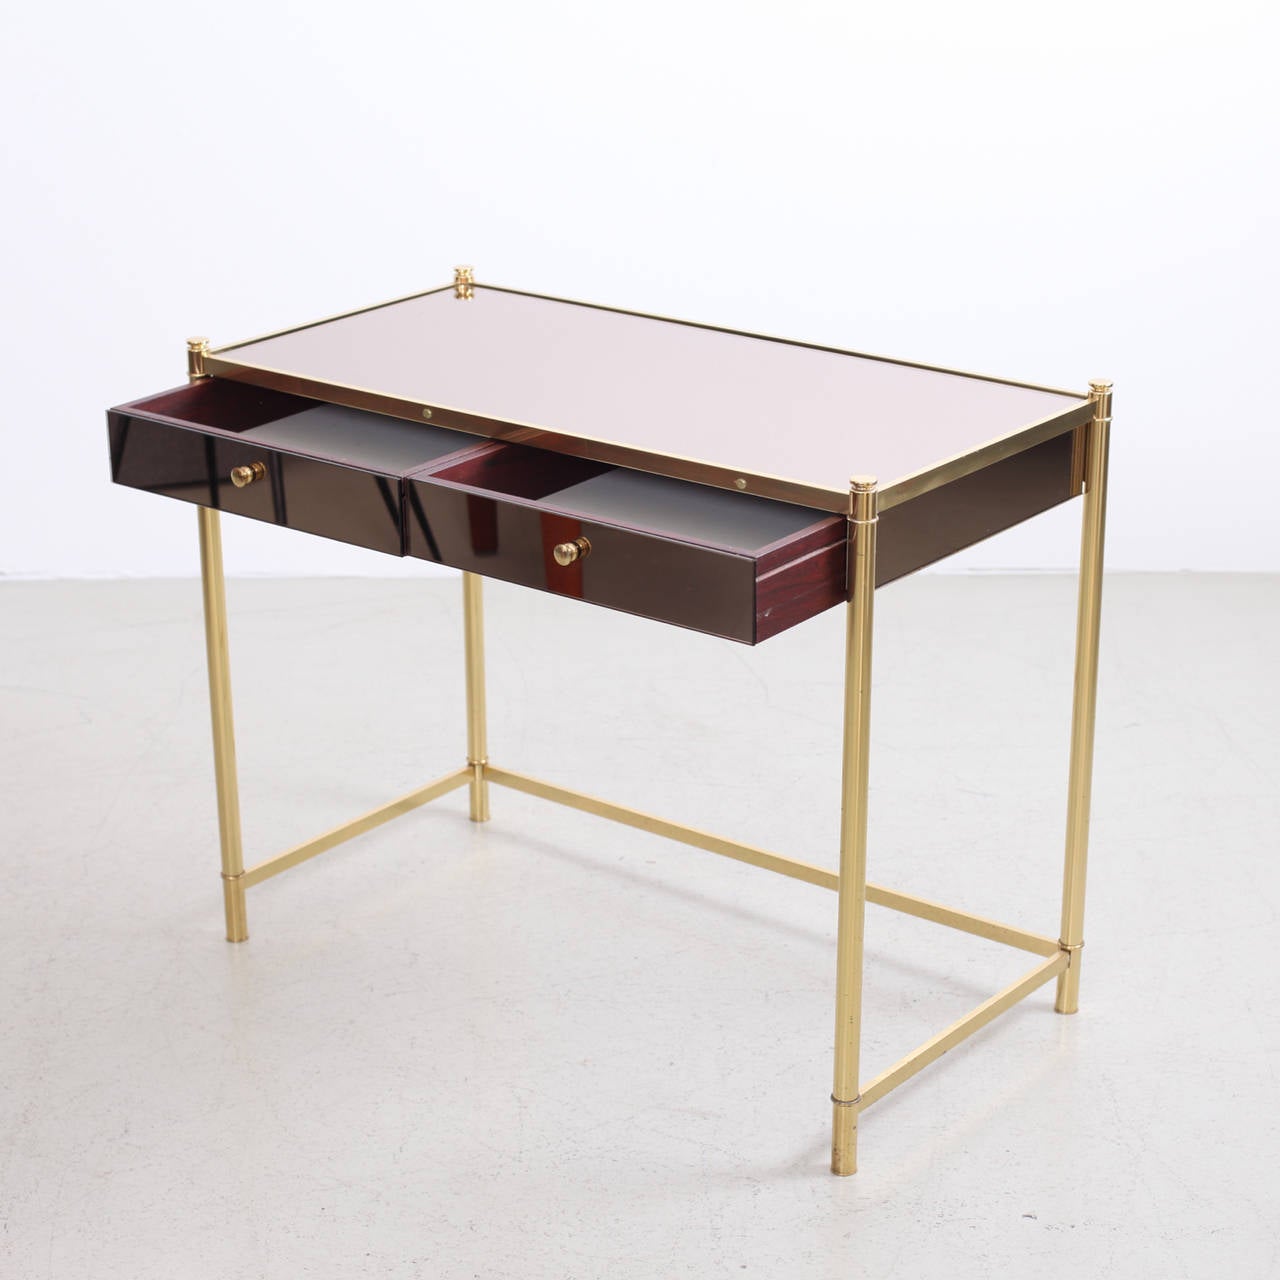 Mid-20th Century Brass and Mirror Dressing or Vanity Table in the Manner of Maison Jansen